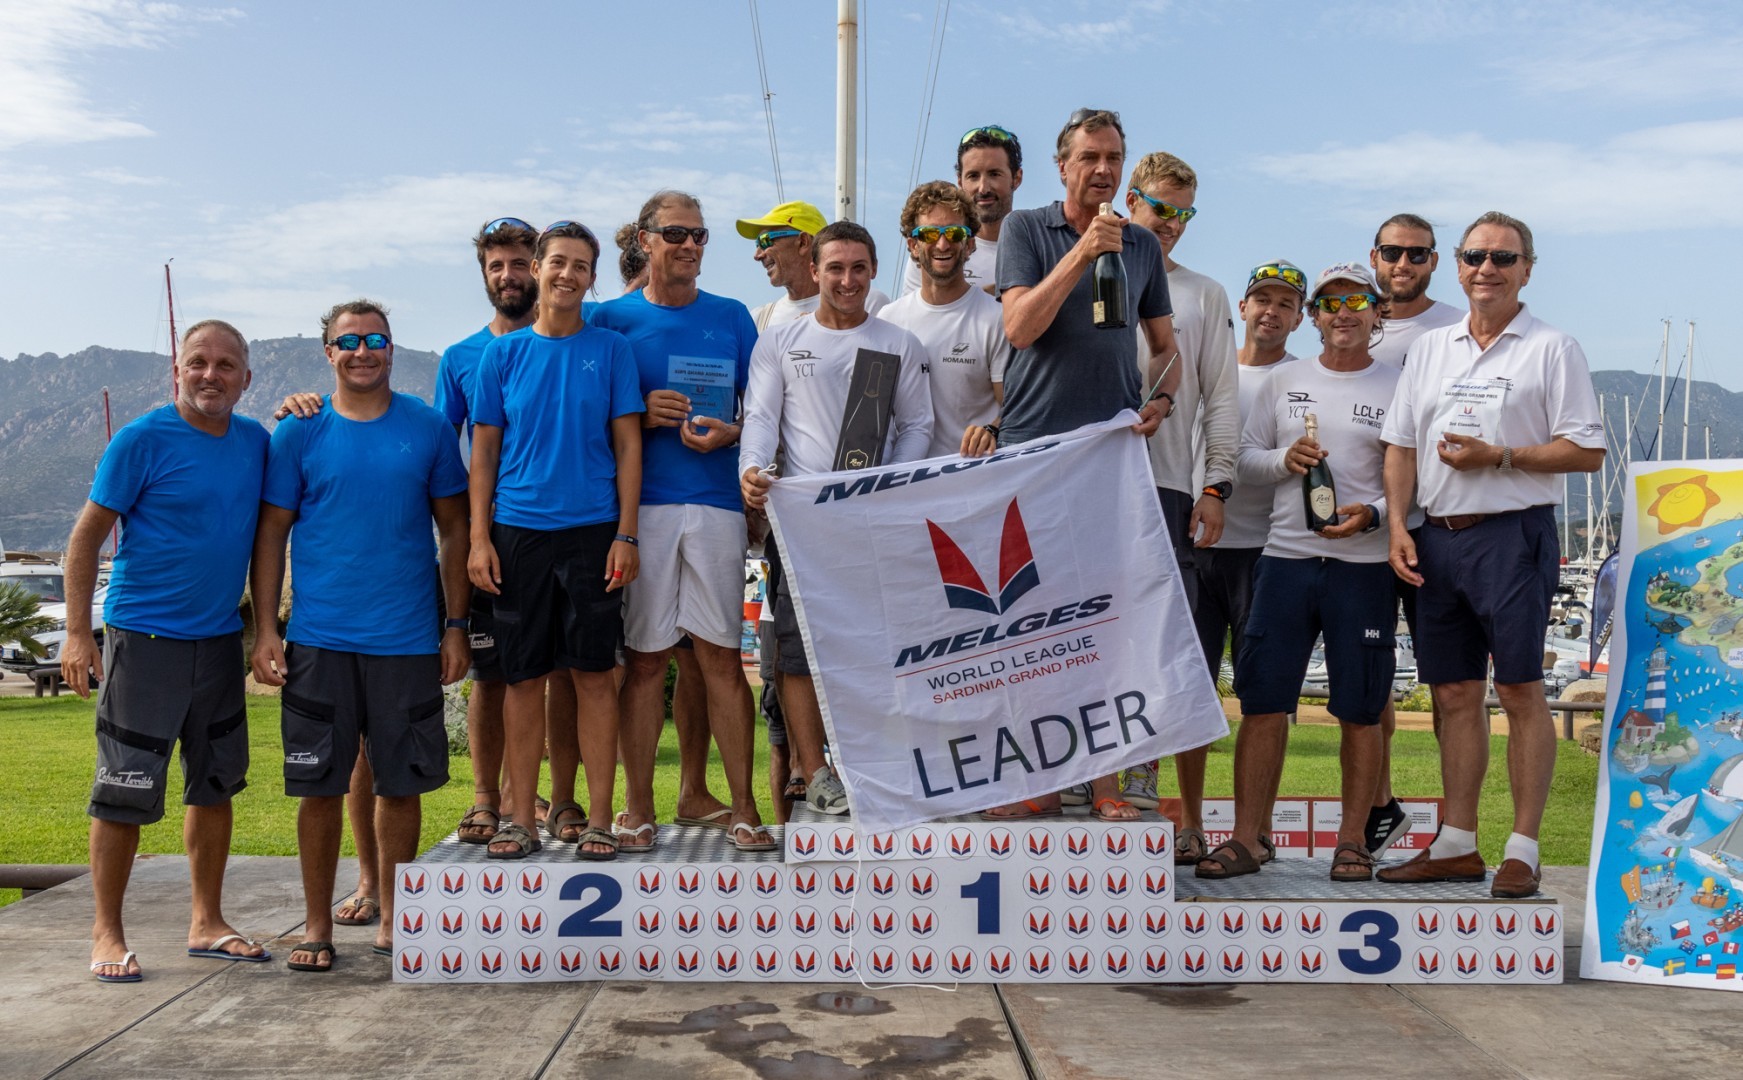 Wilma and Nika on the first step of the podium of the Melges World League Sardinia Grand Prix in Villasimius